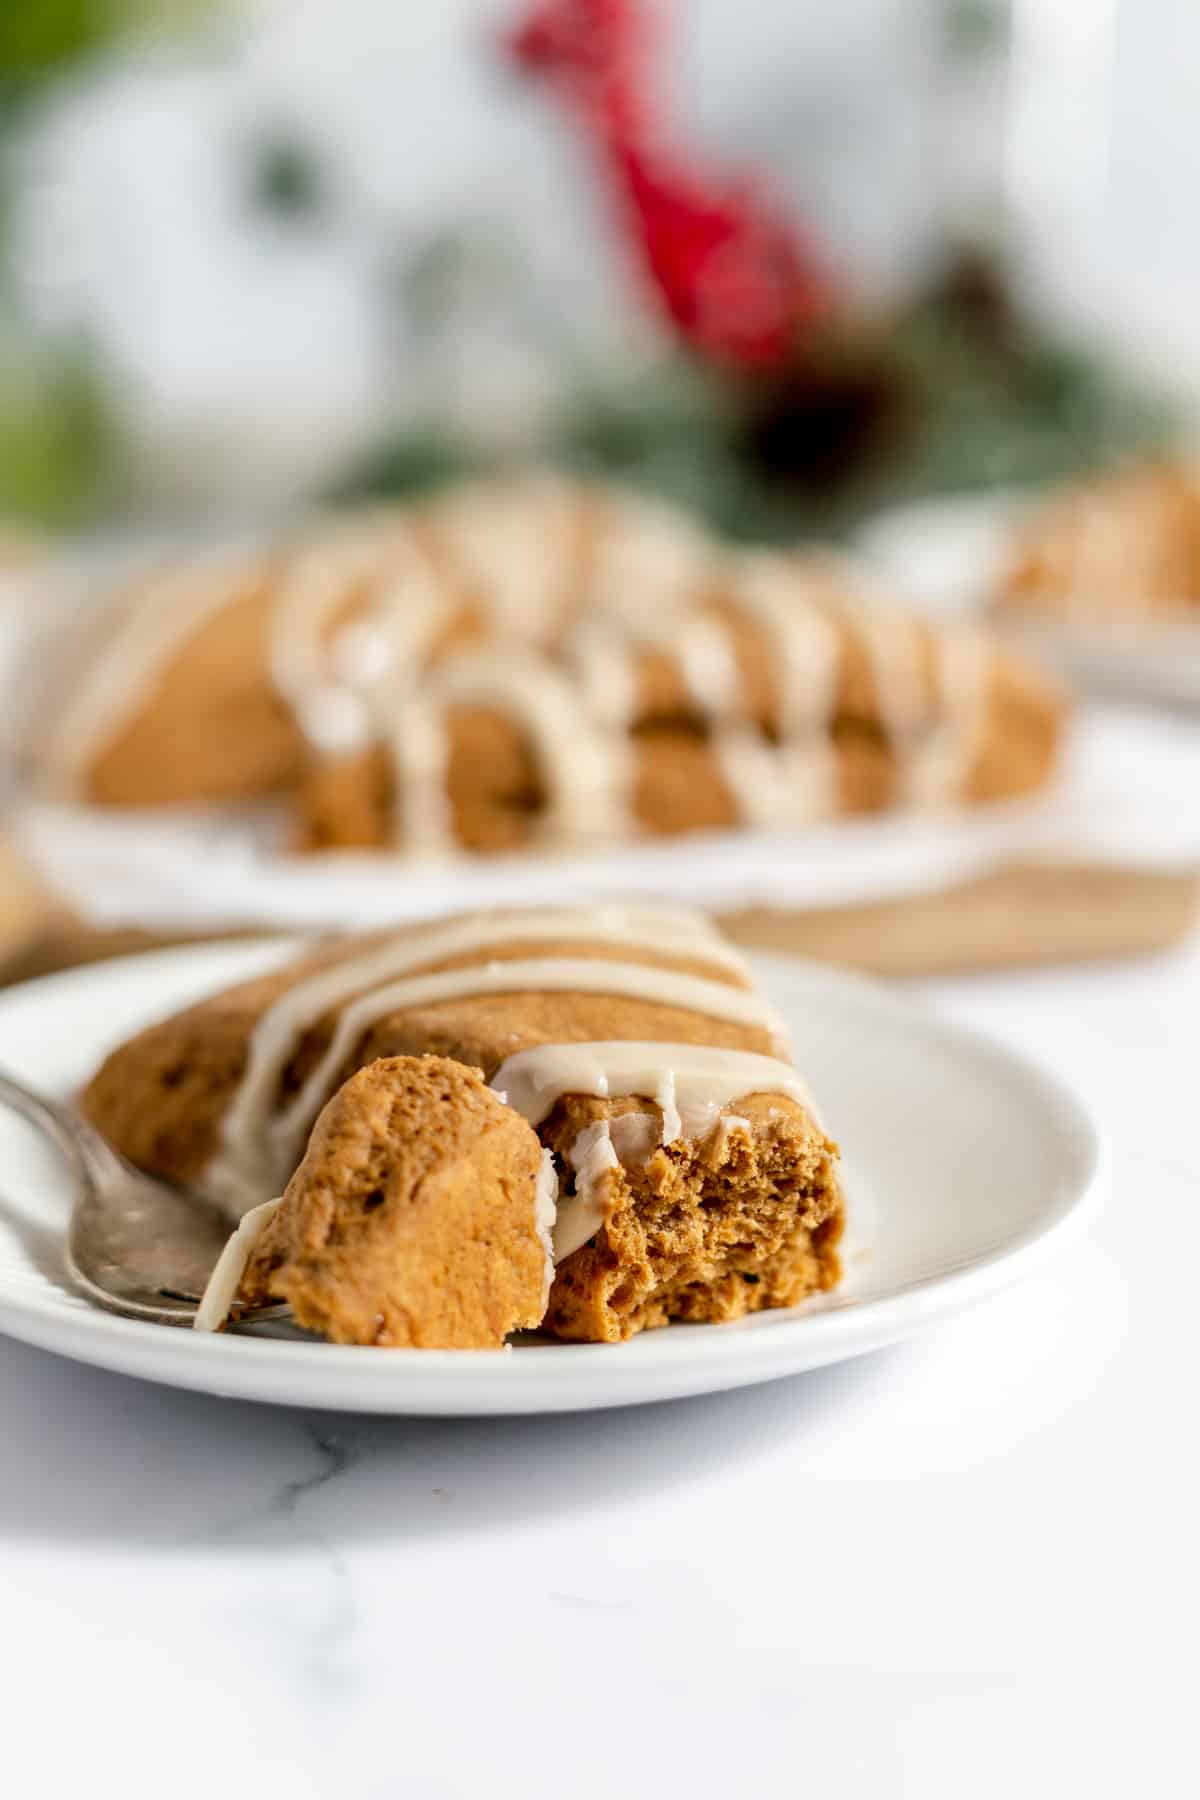 A gingerbread scone on a plate with a bite taken out of it with more gingerbread scones in the background.